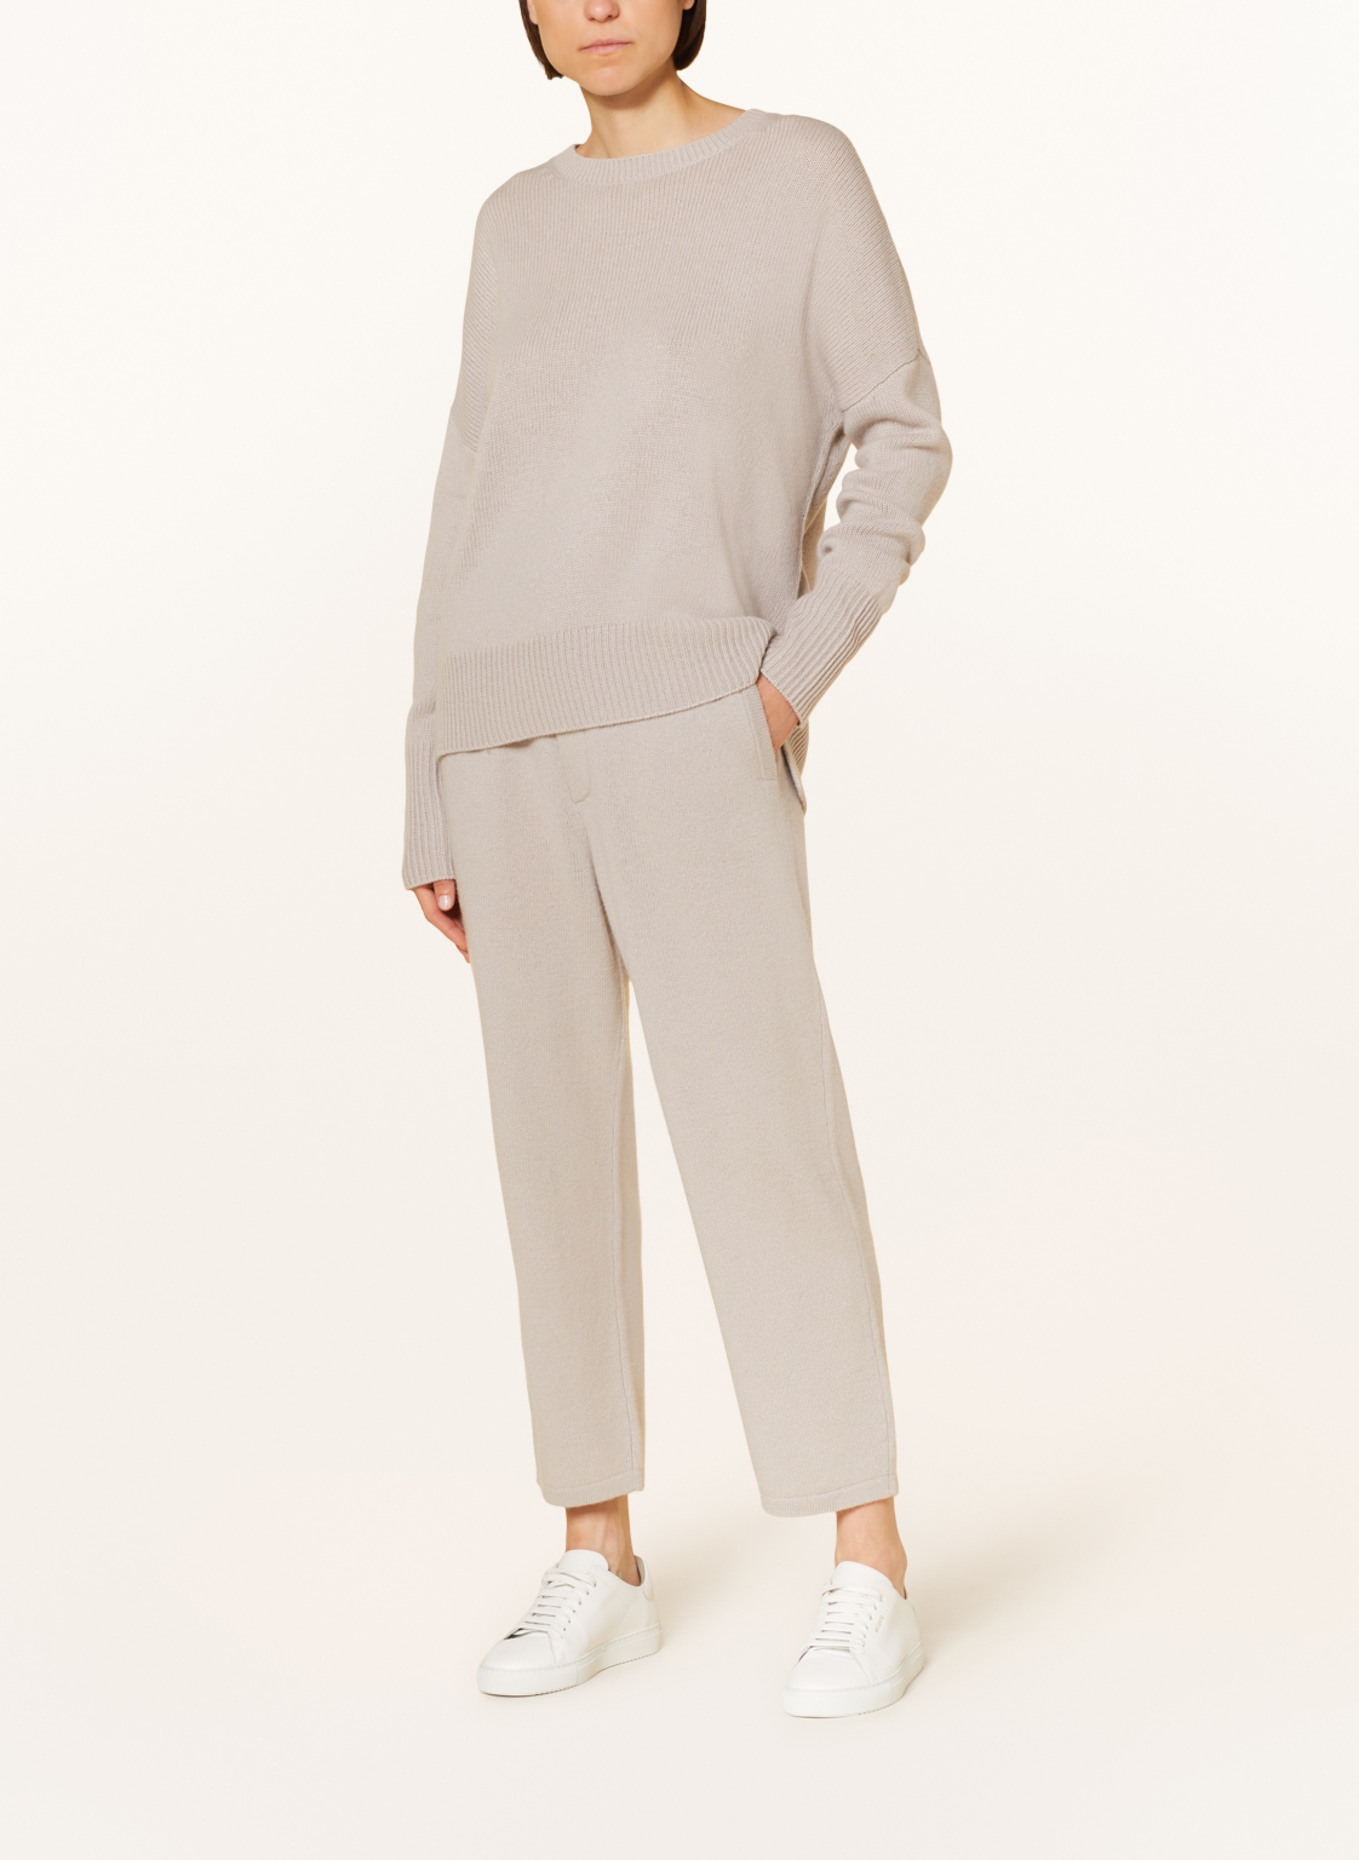 LISA YANG Knit trousers SUNDAY in jogger style in cashmere, Color: LIGHT GRAY (Image 2)